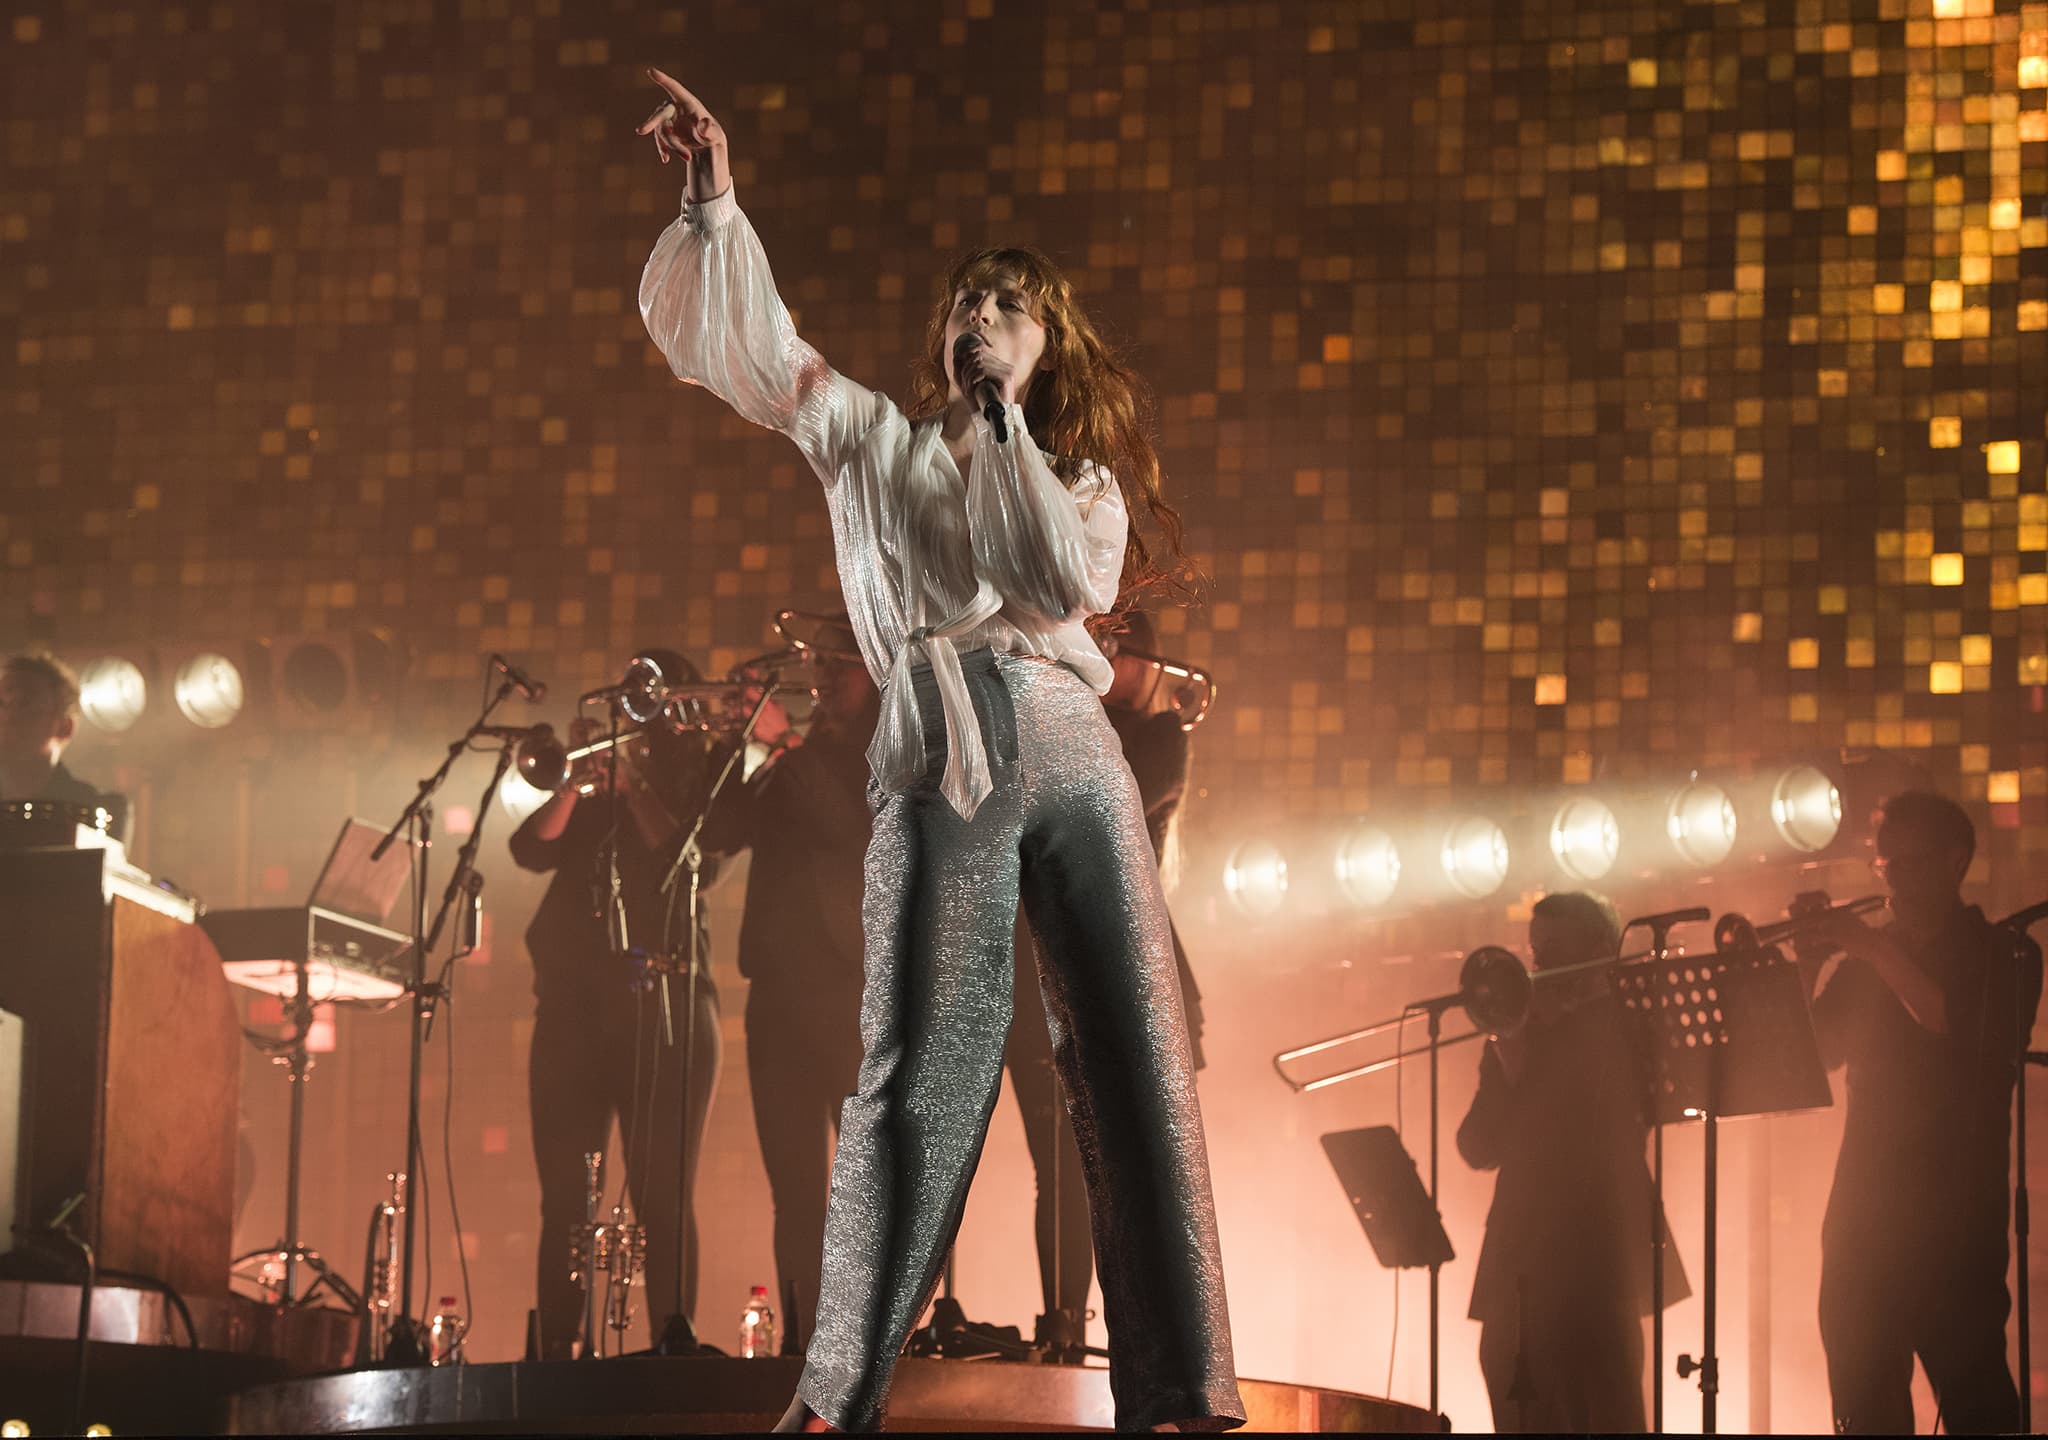 Florence and the Machine will embark on a three-leg tour starting in September